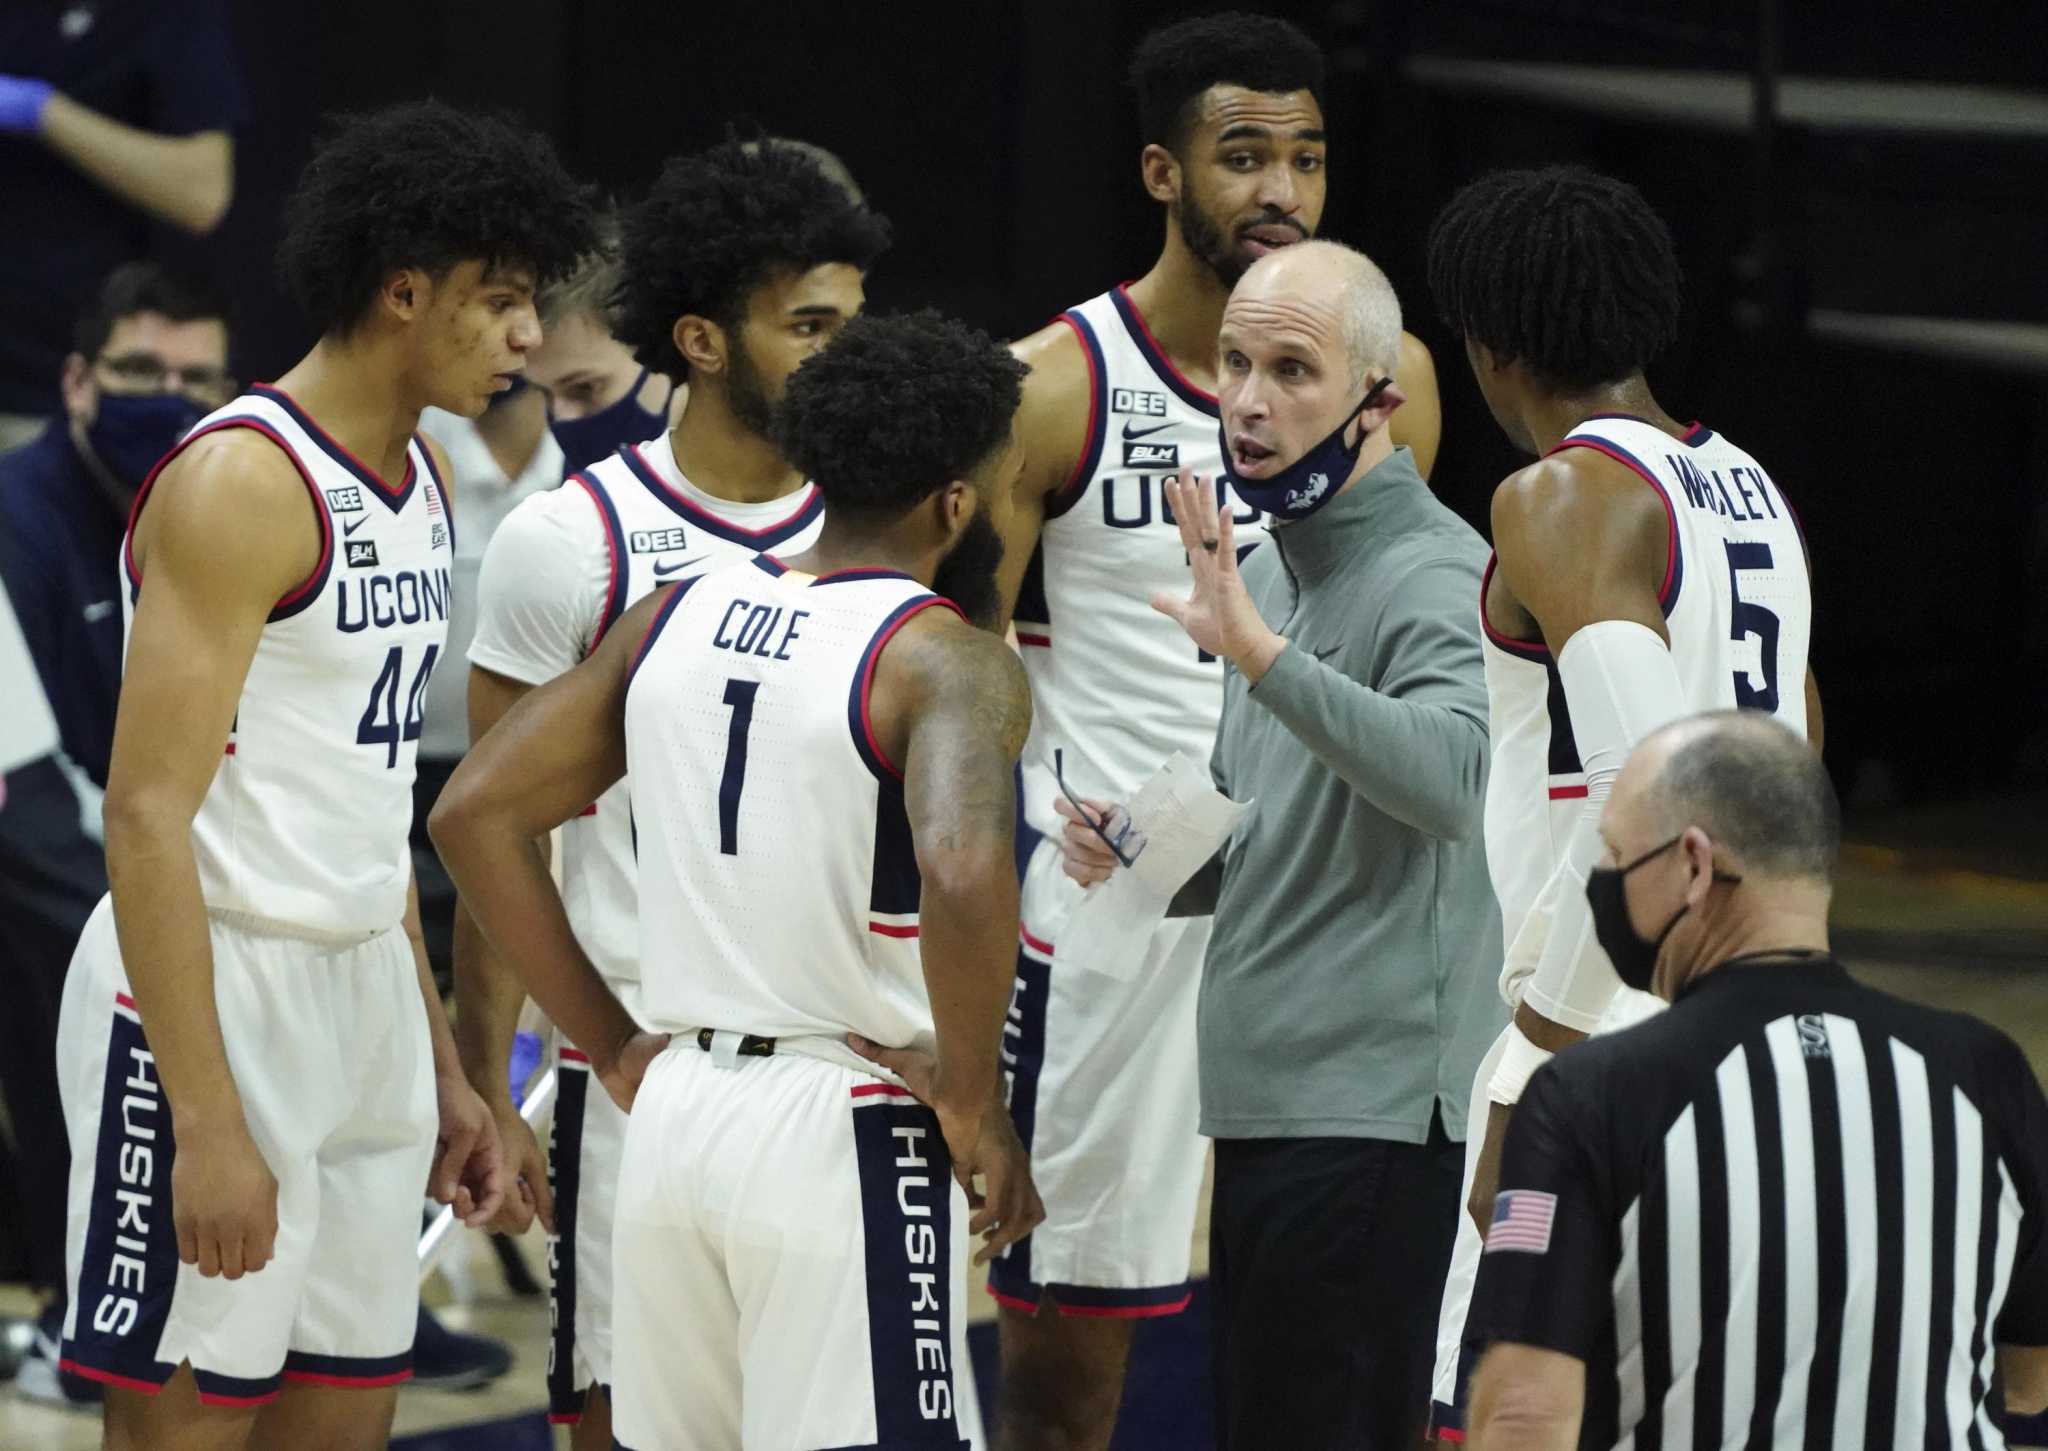 Dan Hurley: Everything you need to know about the UConn basketball